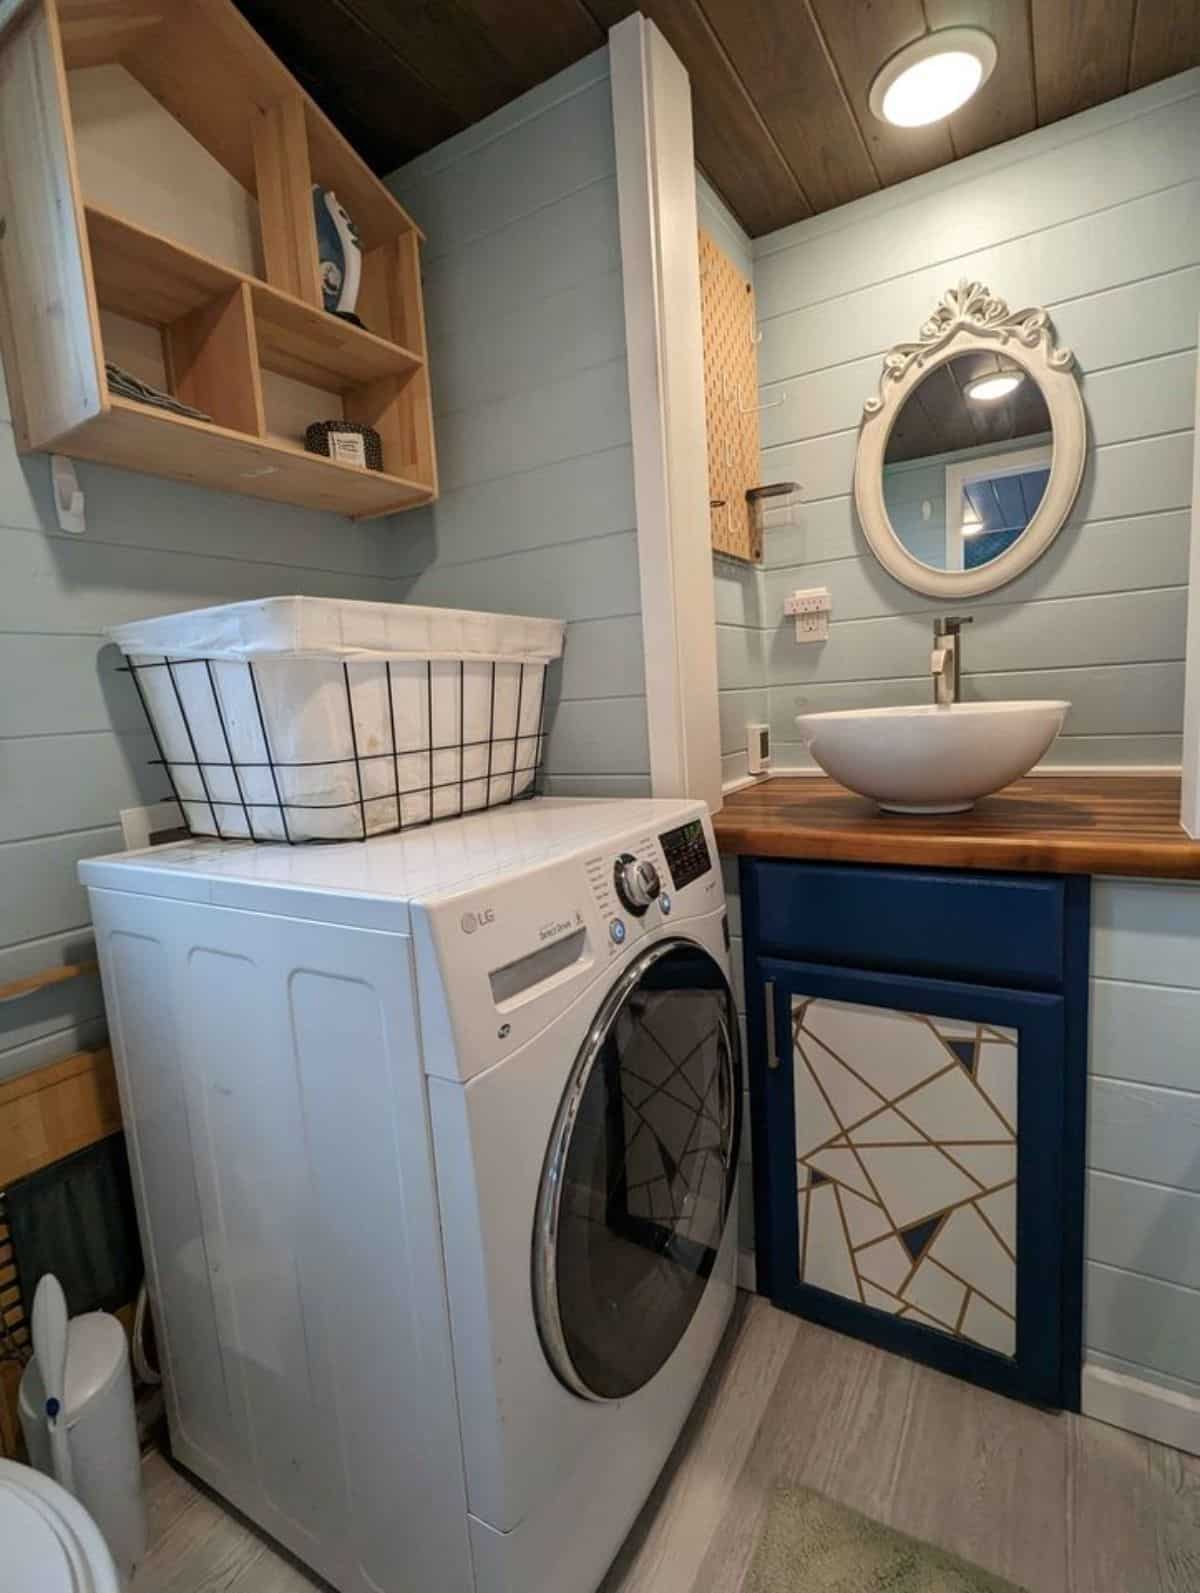 sink with vanity & mirror, washer dryer combo and storage in bathroom of custom home on wheels